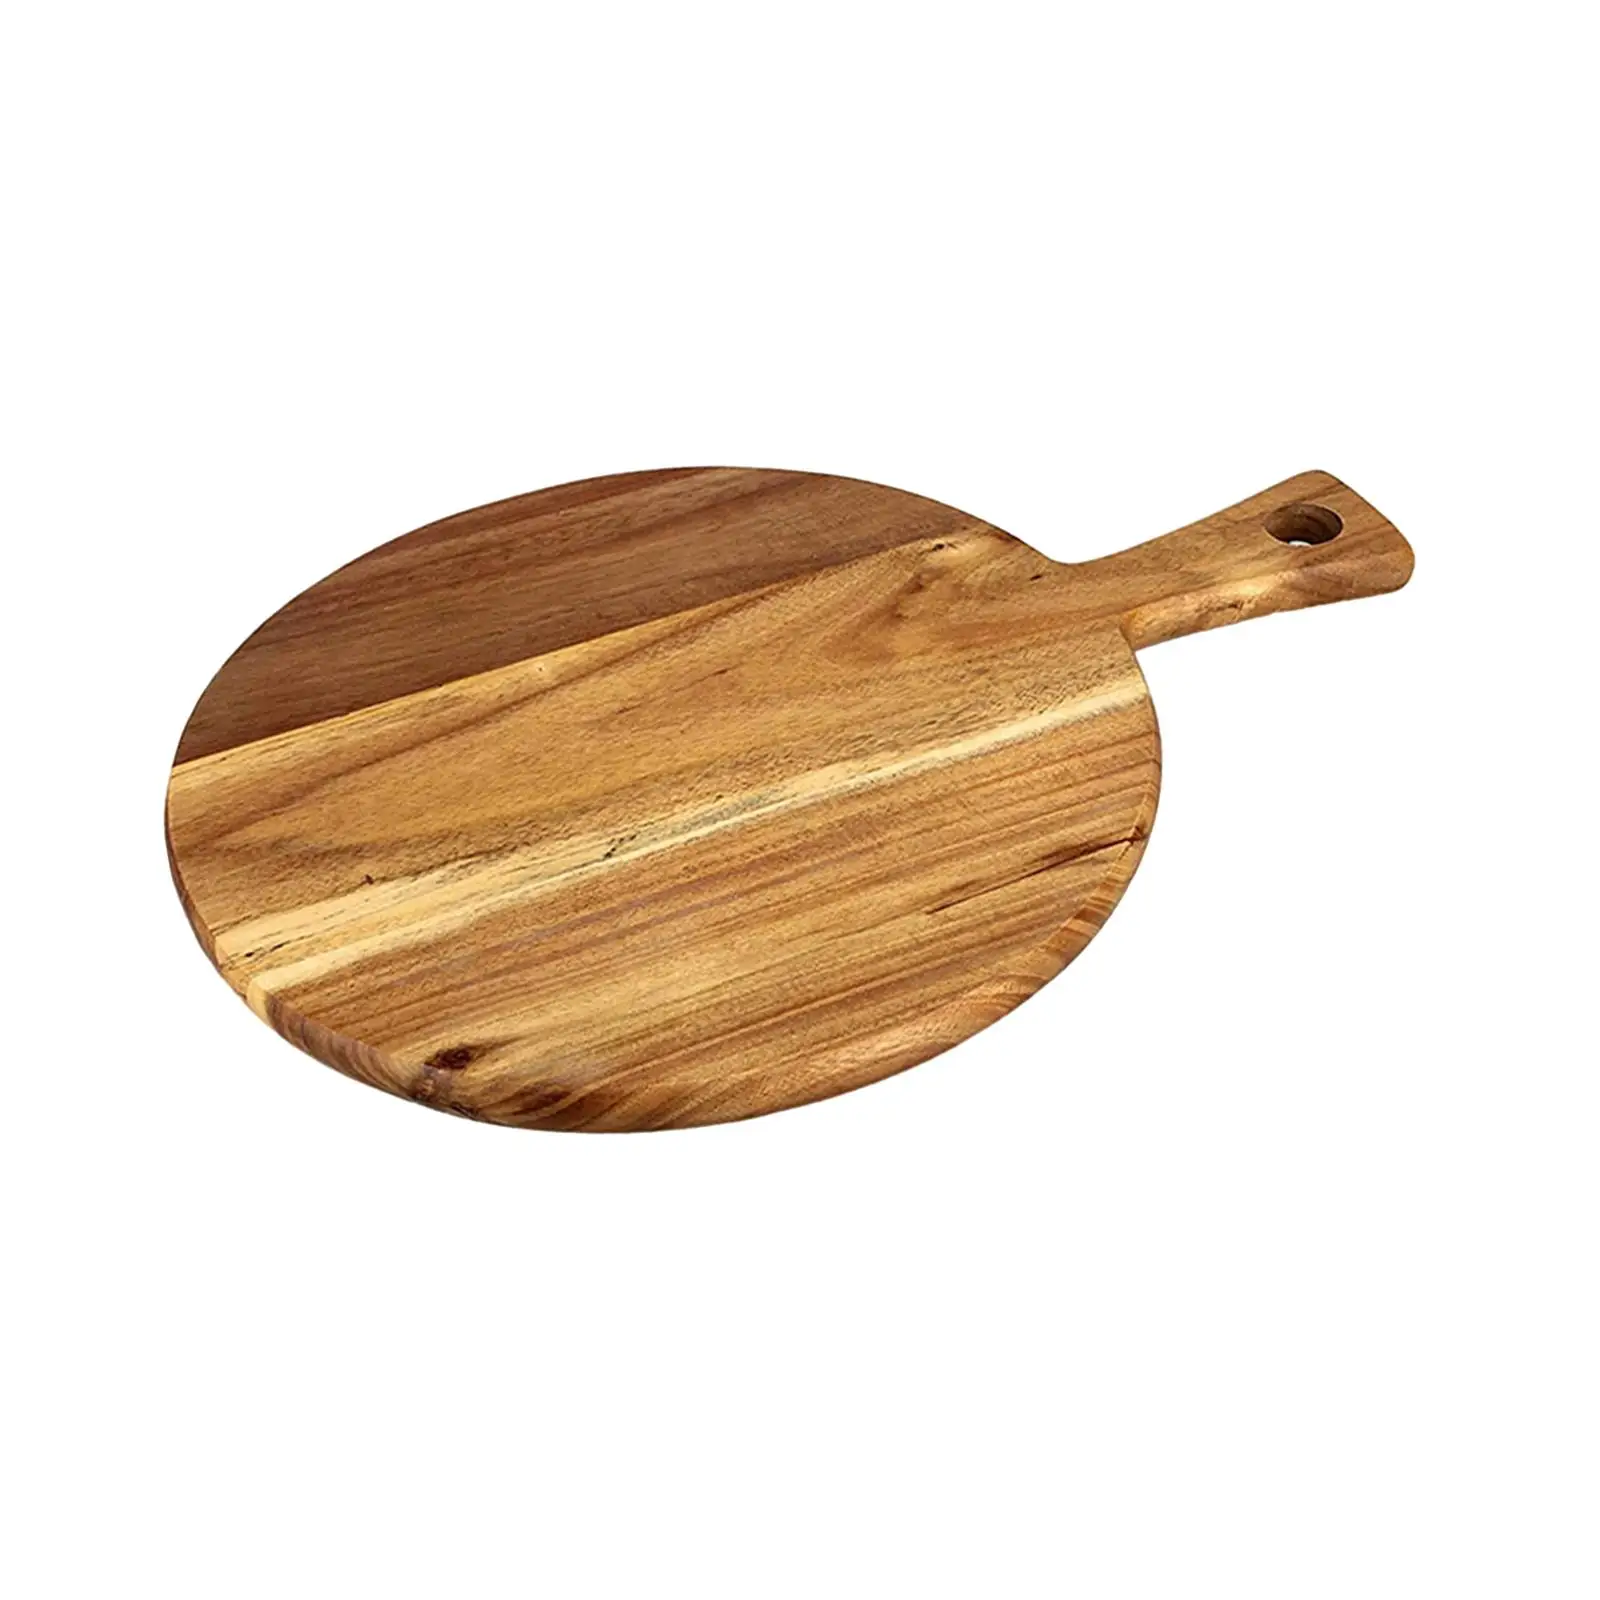 Wood Pizza Peel for Cheese Bread Fruit Sturdy Multipurpose Homemade Ergonomic Oven Accessories Chopping Board Cutting Board